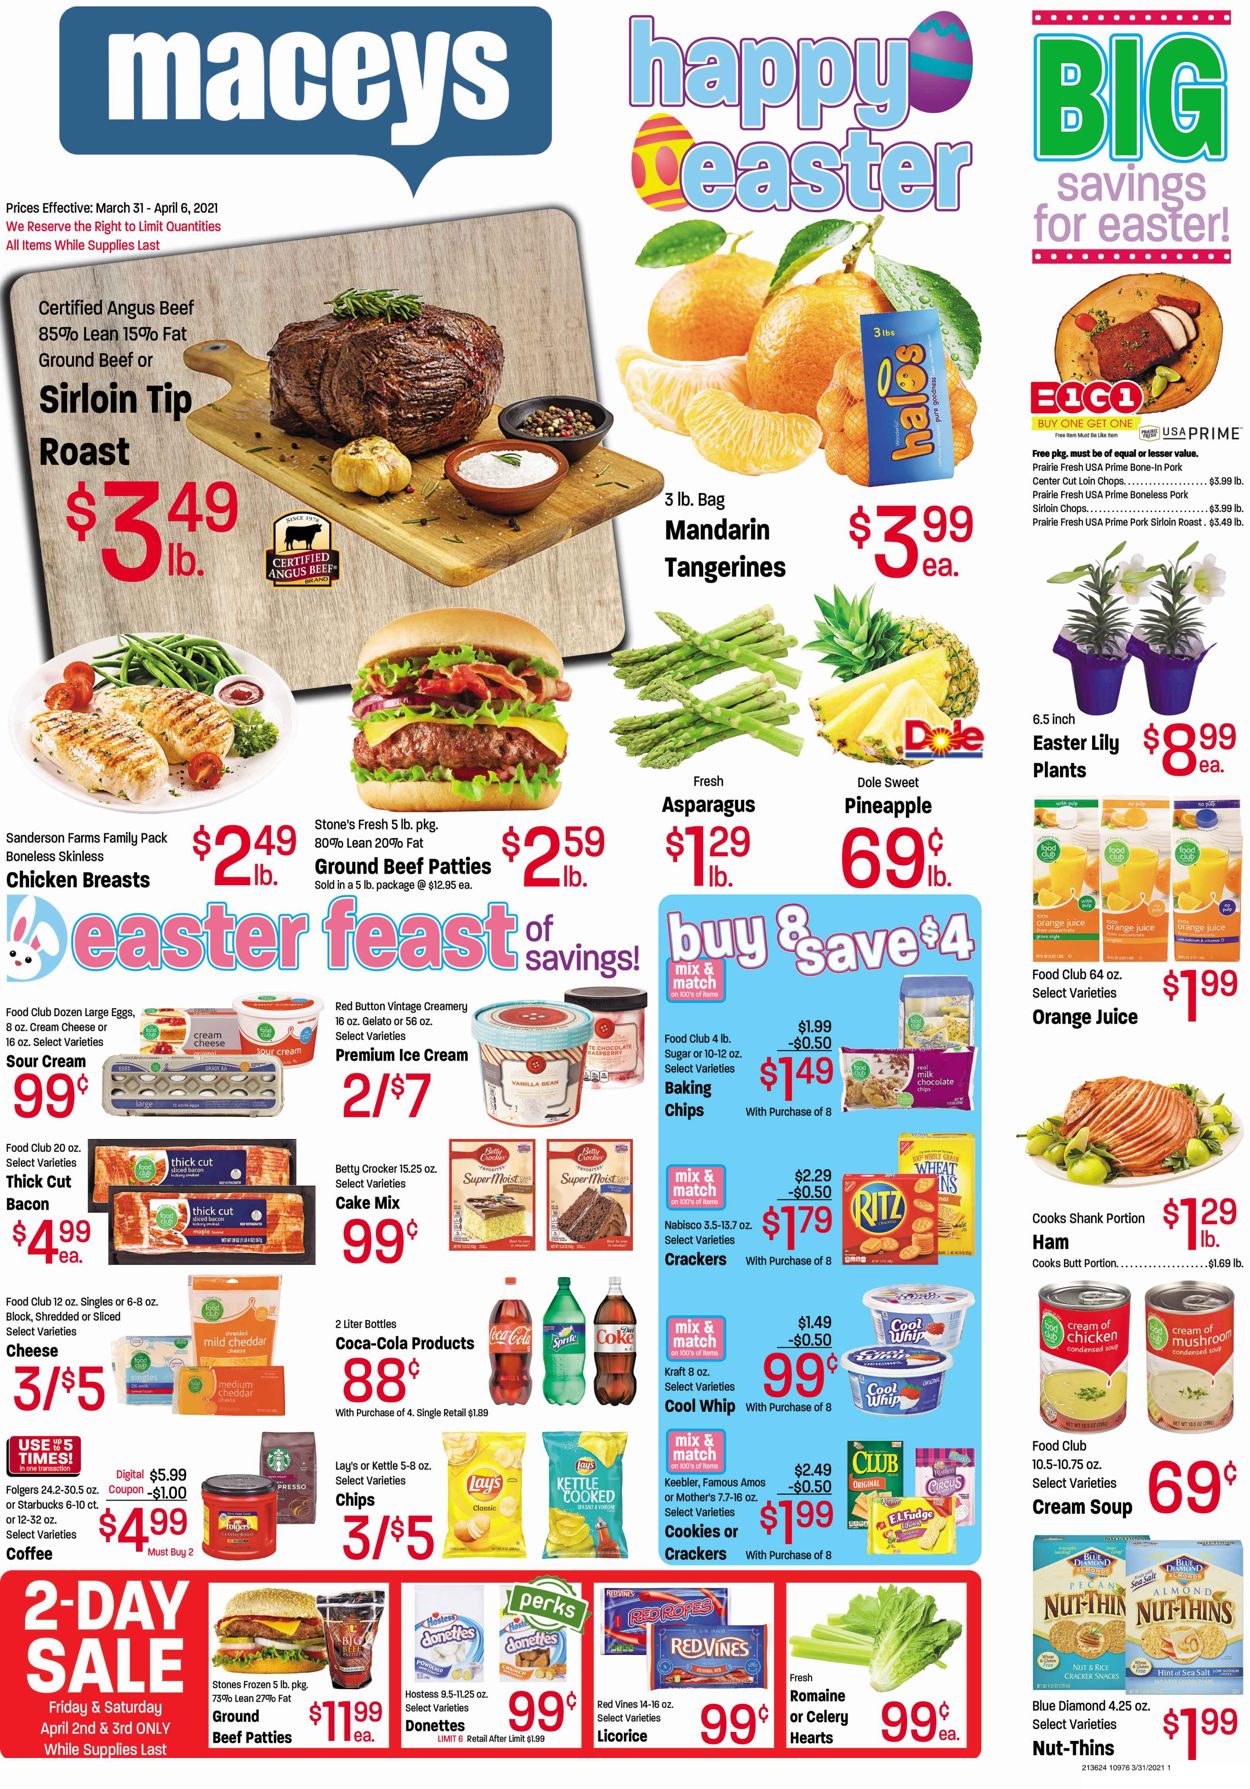 Catalogue Maceys Easter 2021 ad from 03/31/2021